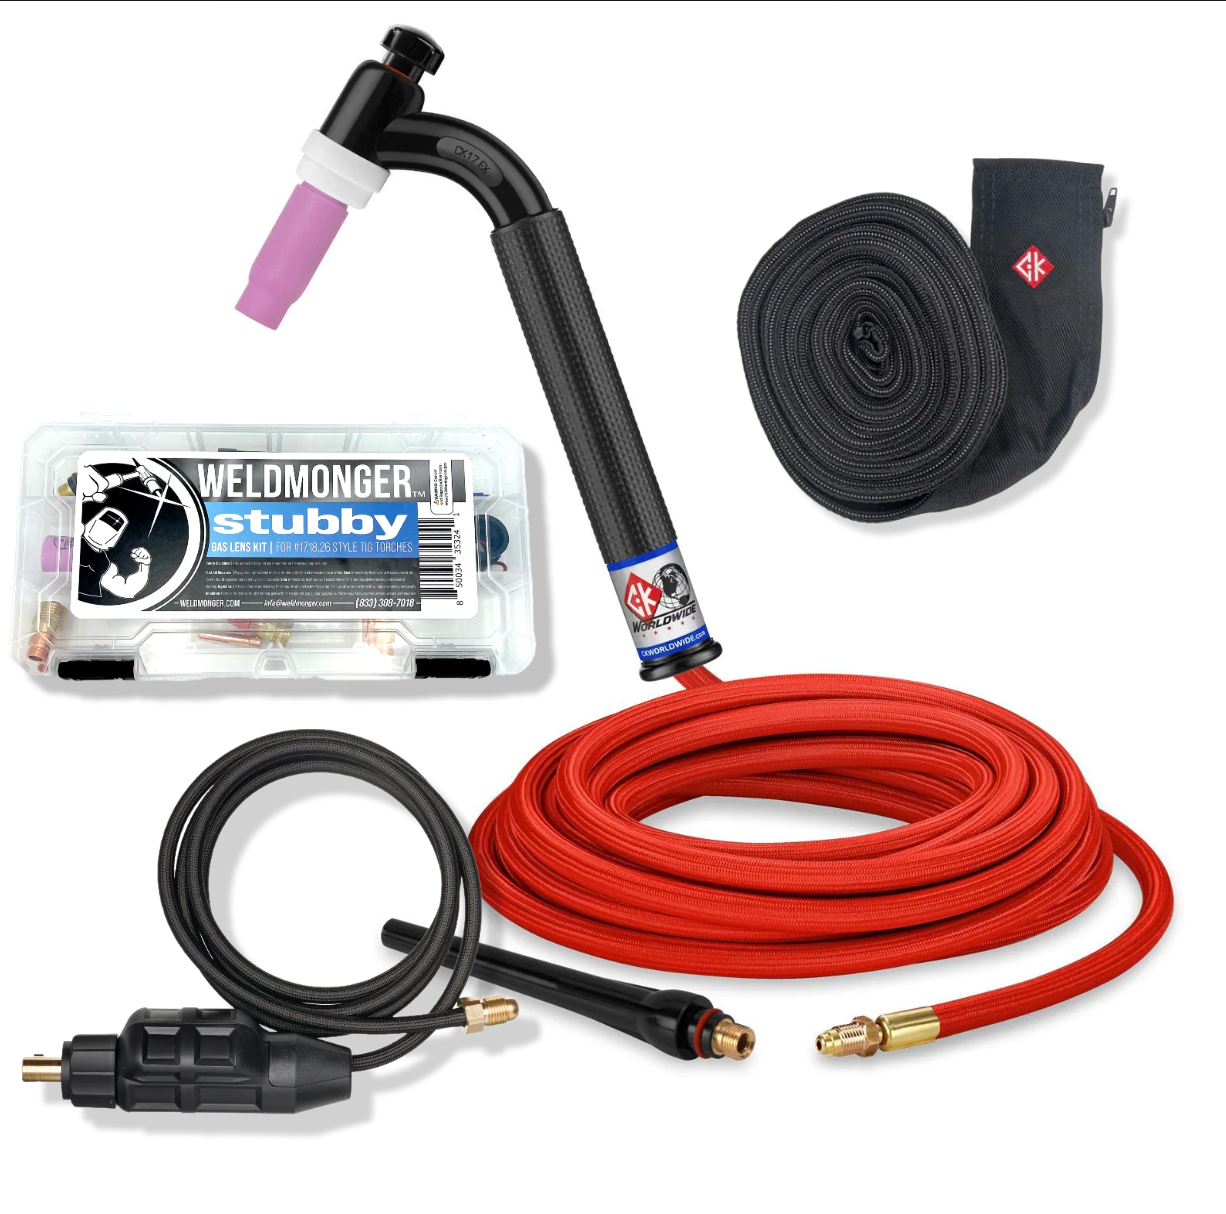 CK Worldwide #17 Air Cooled Tig Torch Bundle W/ 25ft Superflex Cable, SL2-35 Dinse Connector, Zippered Nylon Hose Cover, WELDMONGER® Stubby Gas Lens Kit